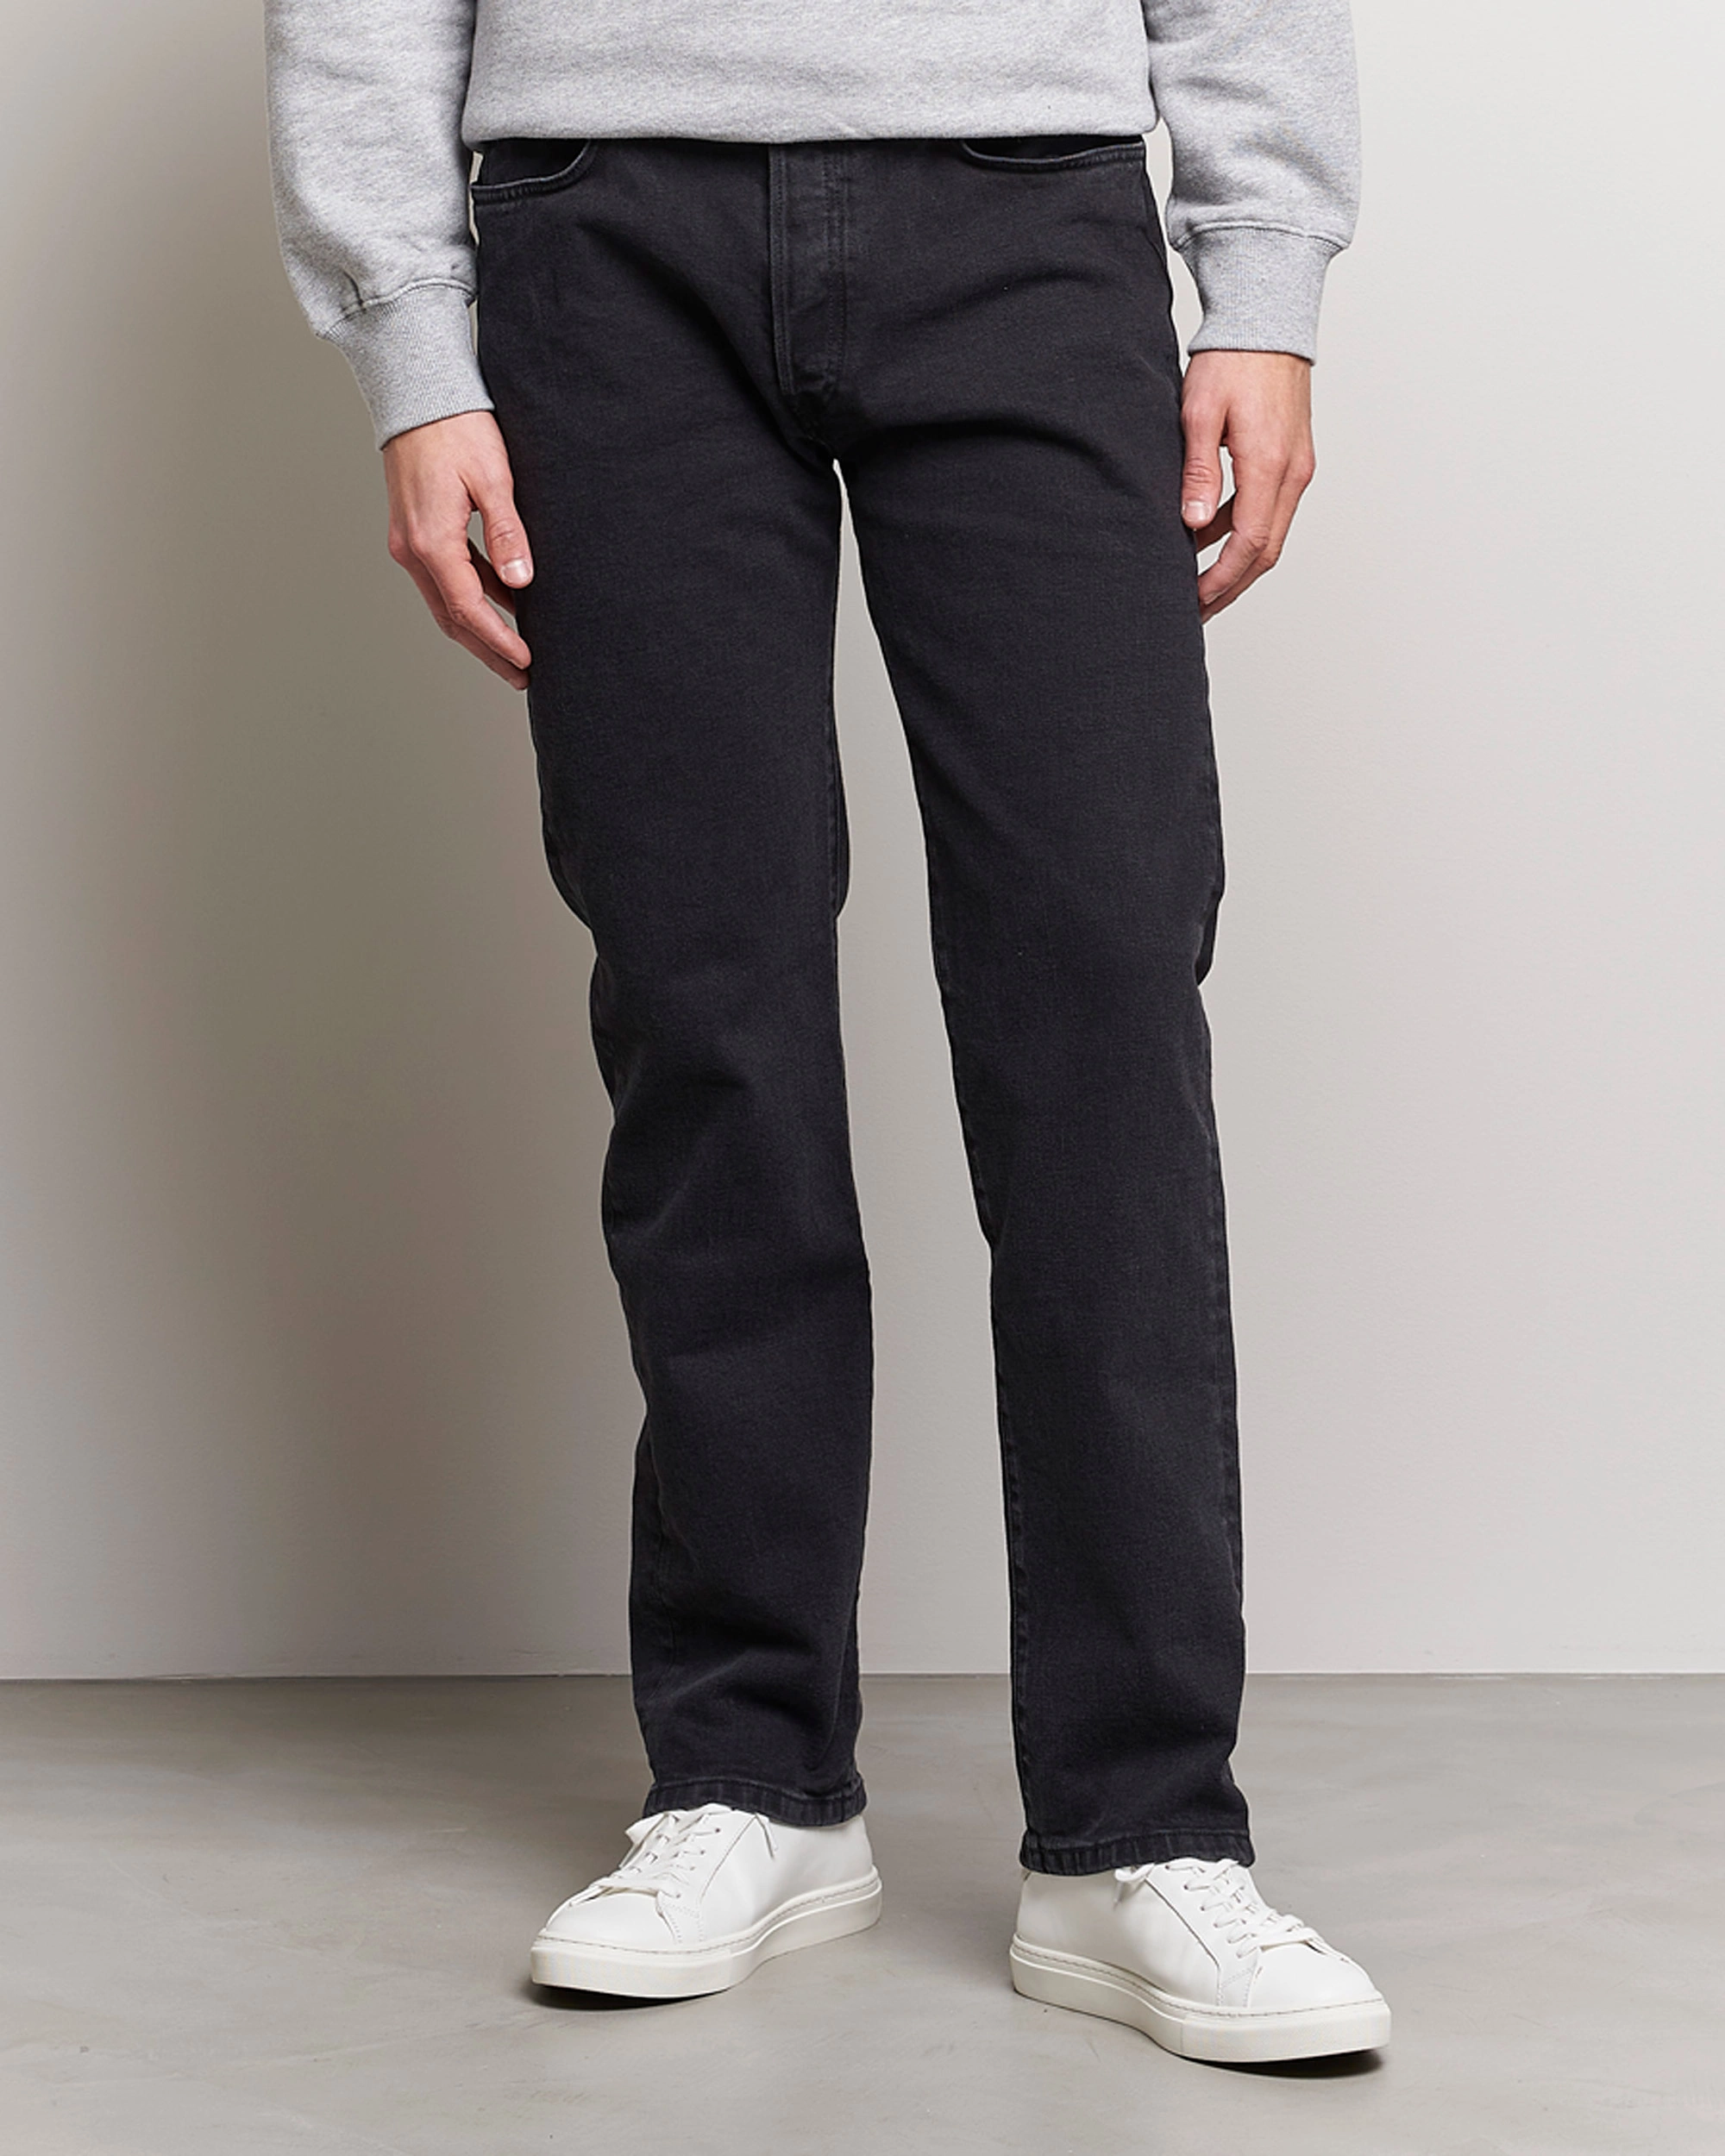 Homme | Sections | Jeanerica | CM002 Classic Jeans Black 2 Weeks